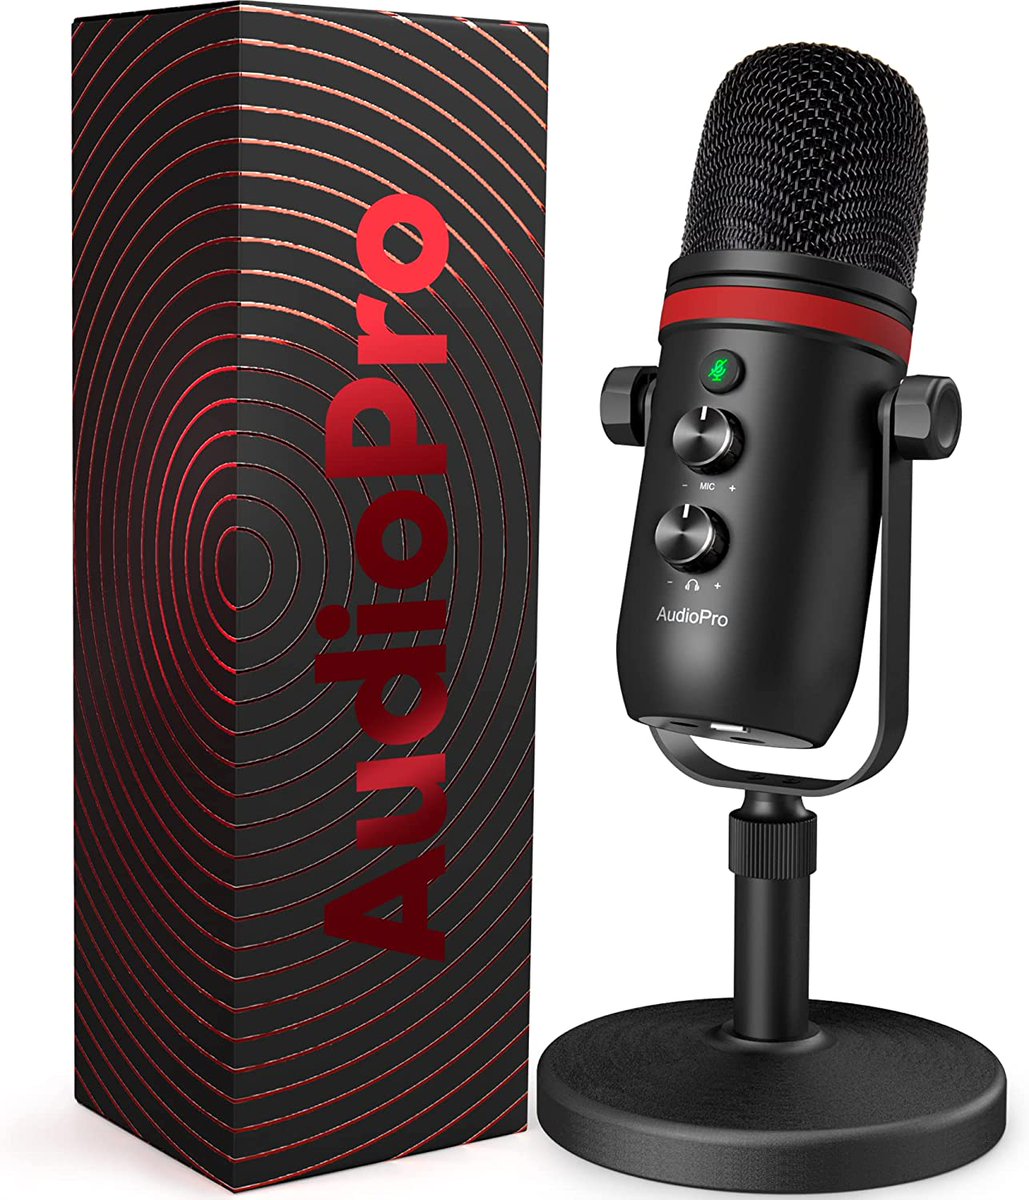 AUDIOPRO USB Microphone - Computer Condenser Gaming Mic for PC/Laptop/Phone/PS4/5, Headphone Output, Volume Control, USB Type C Plug and Play, LED Mute Button, for Streaming, Podcast, Studio Recording# shope here!!! justshopmall.com/#/productDetai…